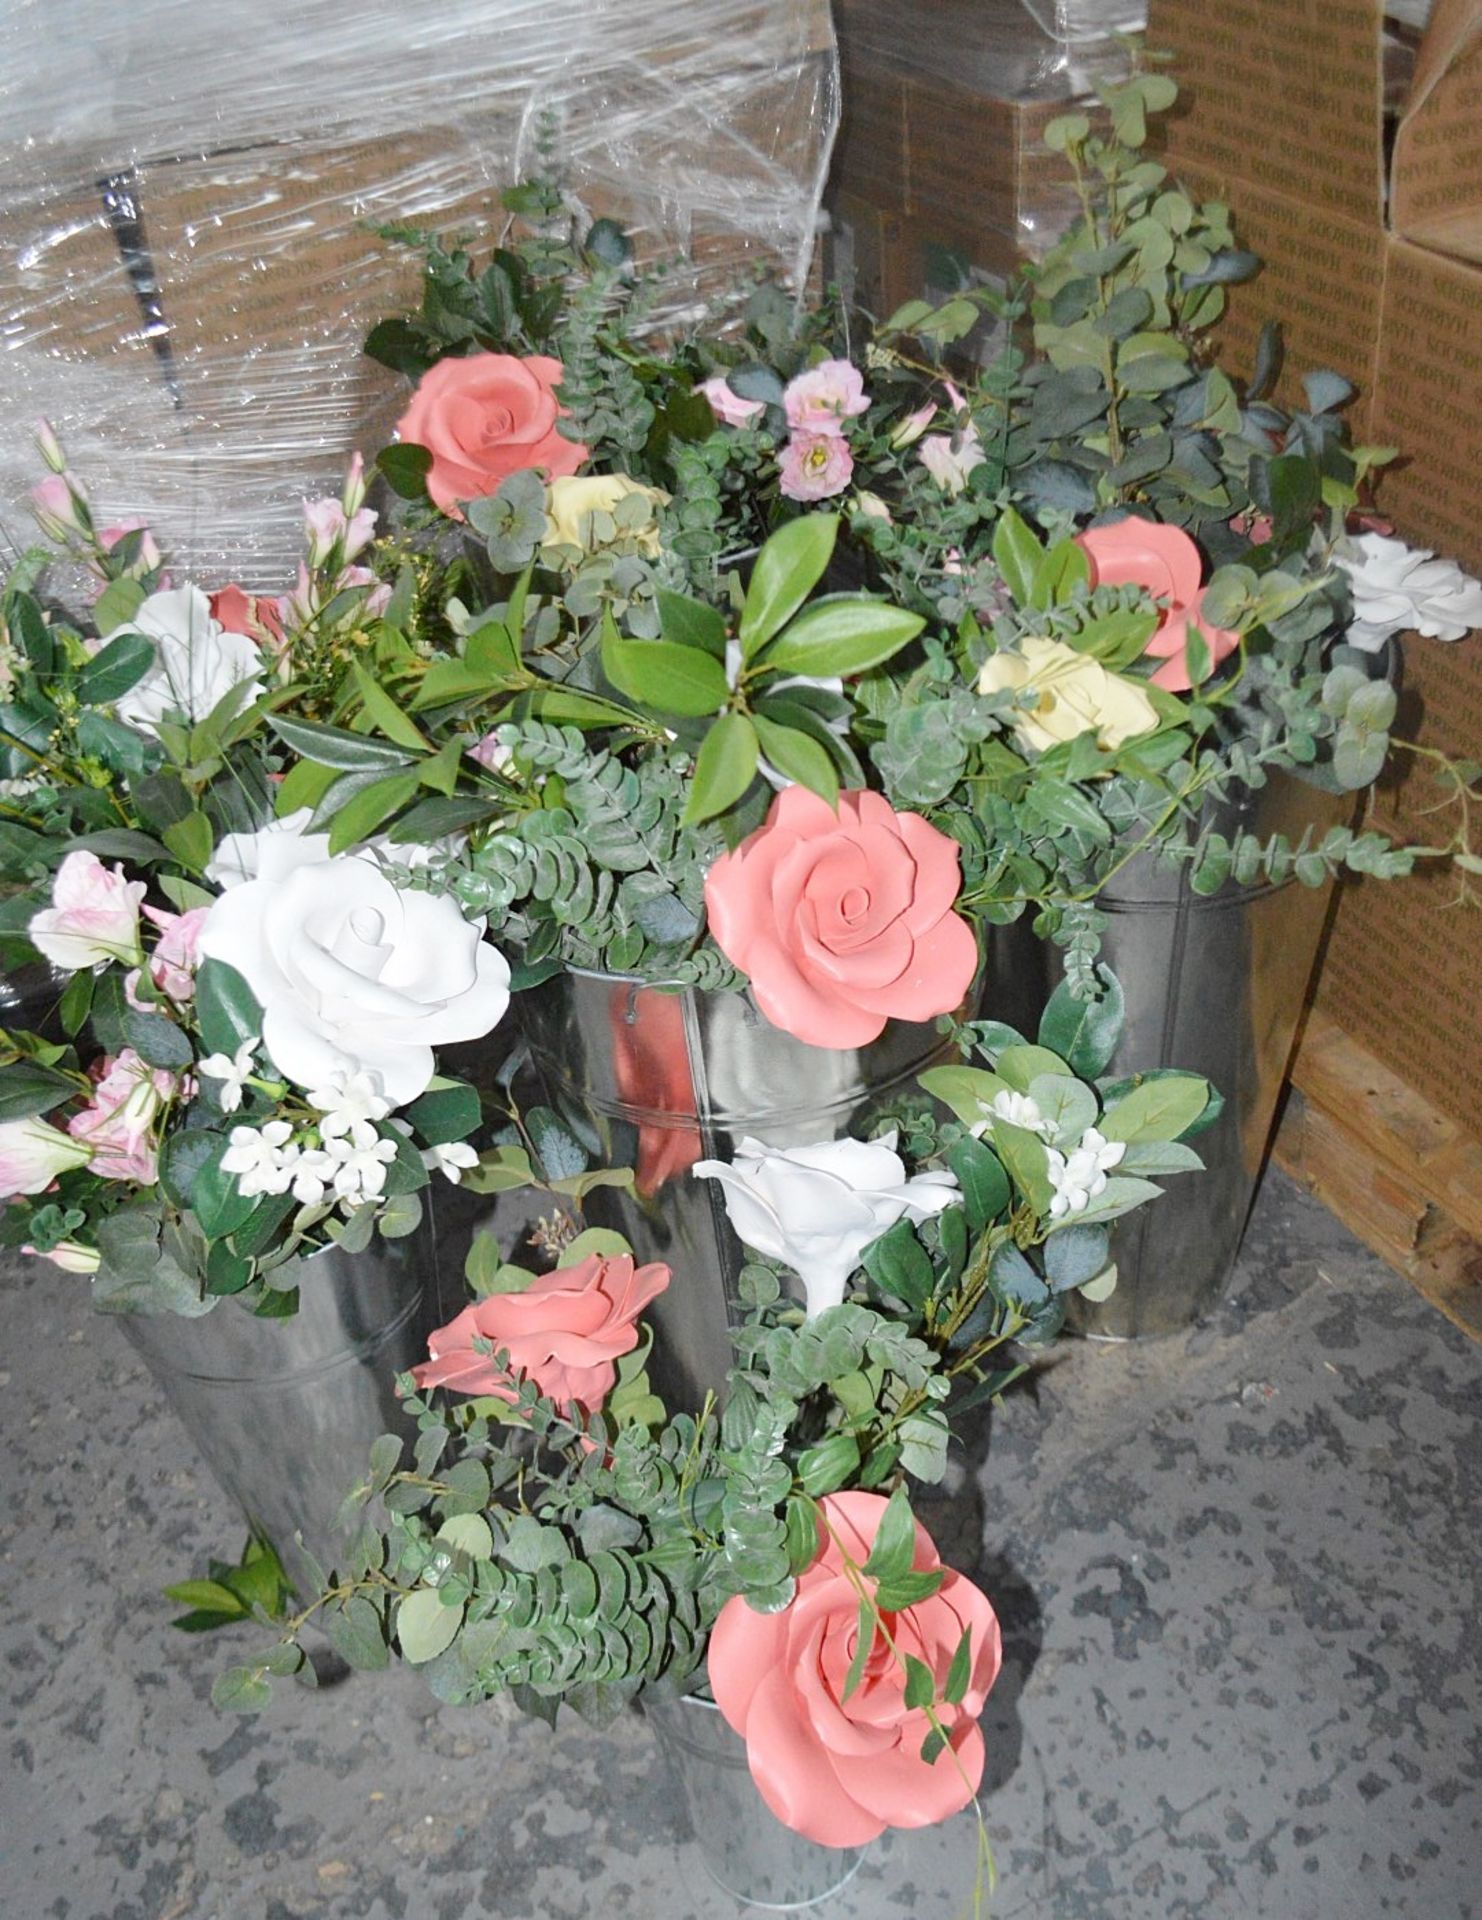 6 x Stunning Commercial Floral Display Bouquets Featuring Handmade Clay Roses and Silk Sprays - Ref: - Image 10 of 13